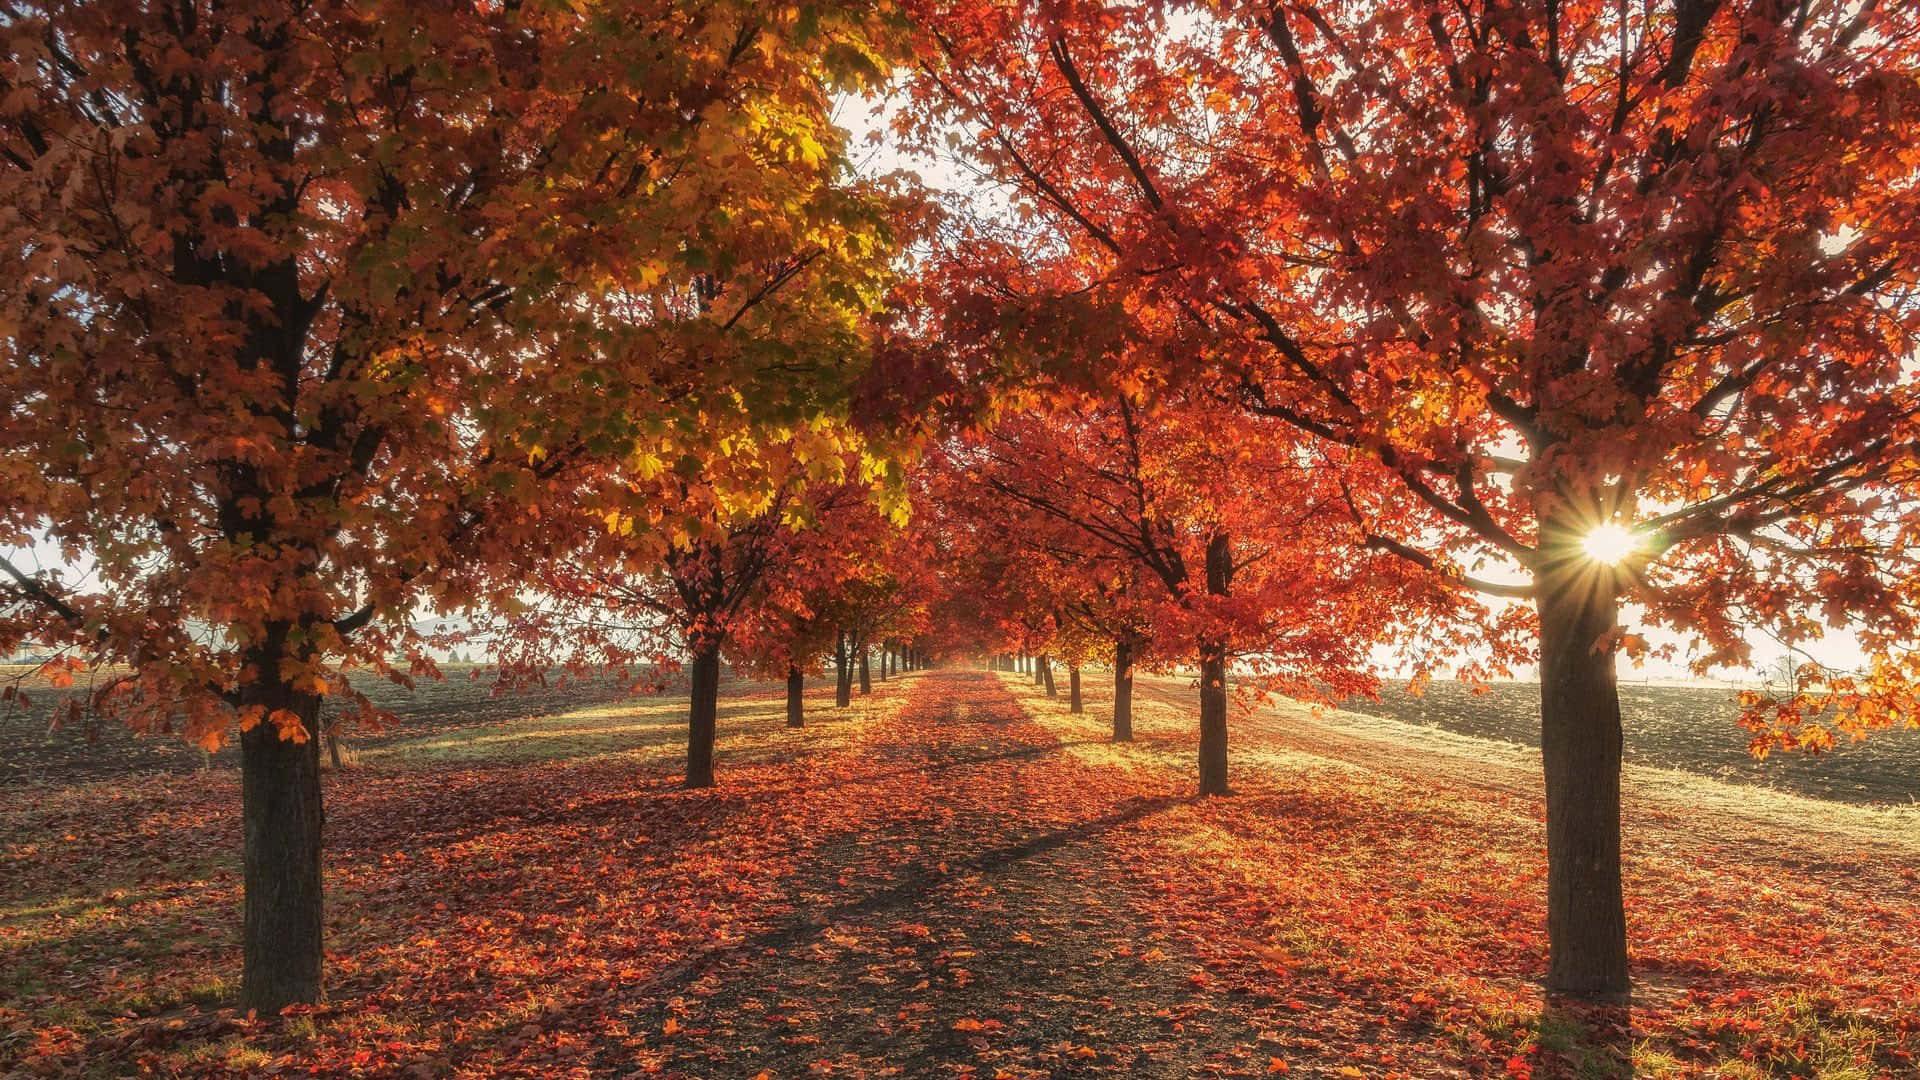 Celebrate the Beauty of Fall with this Autumn Desktop Wallpaper Wallpaper